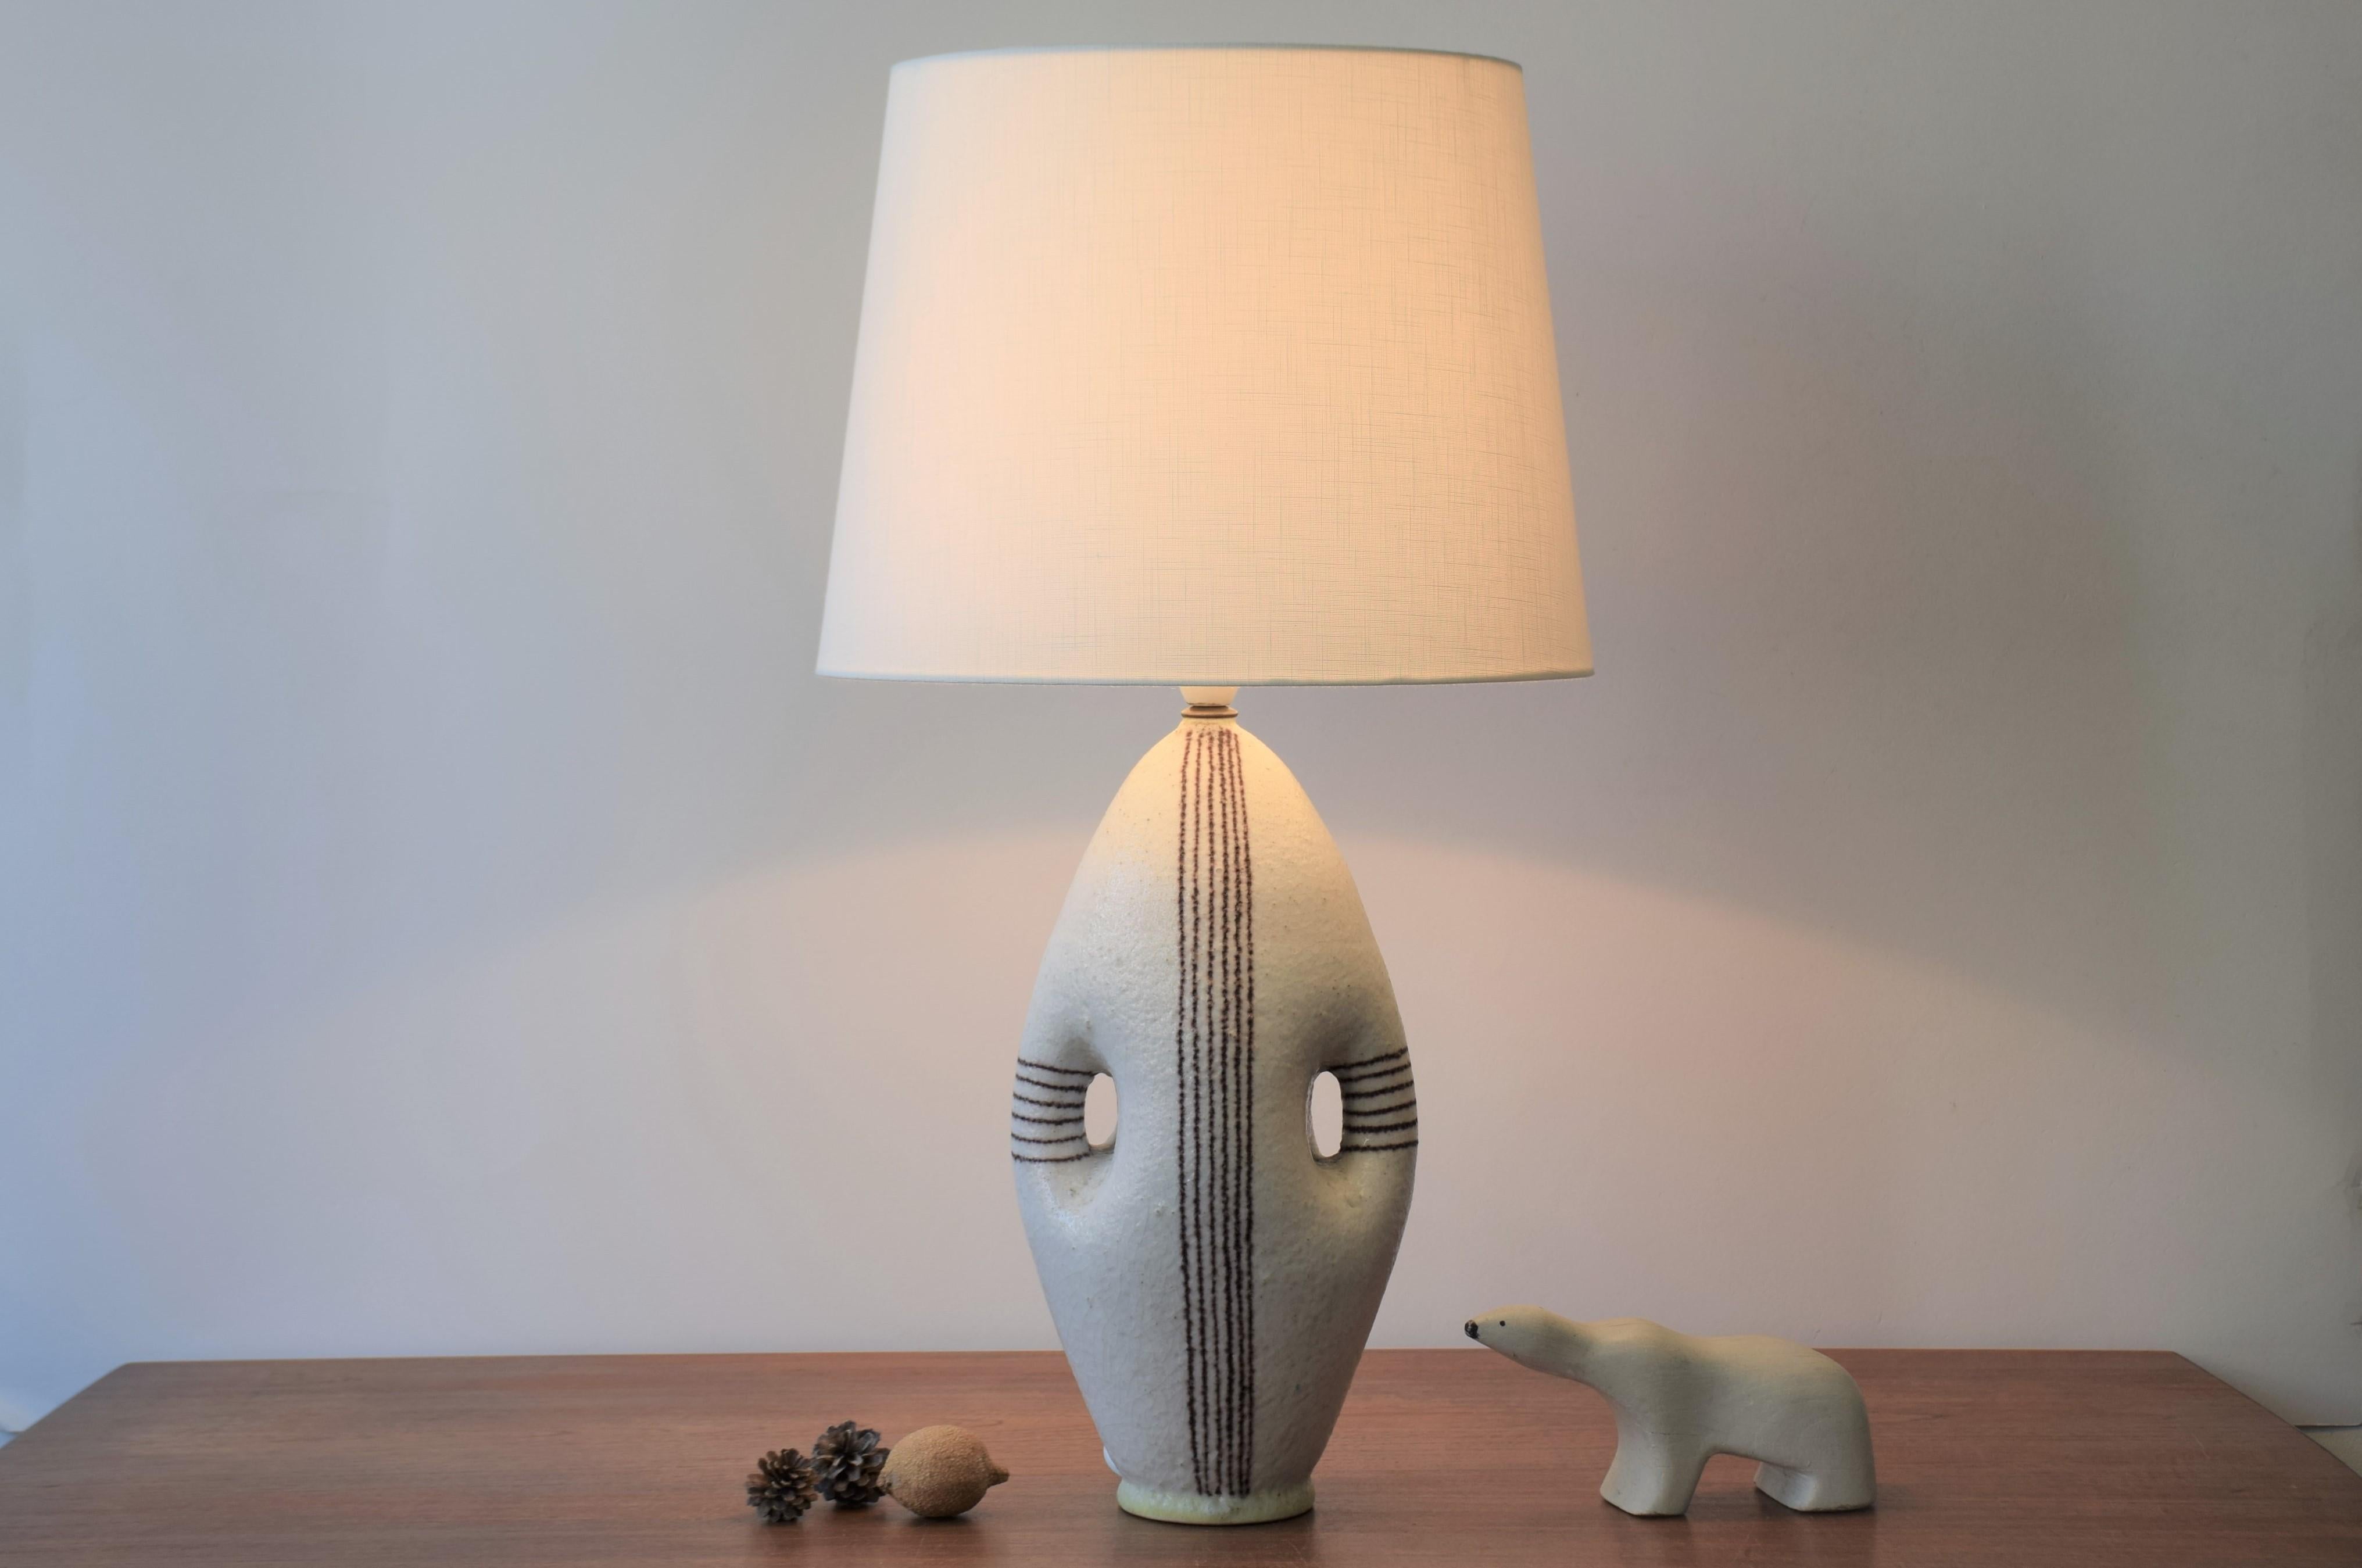 Tall table lamp by Italian ceramist Guido Gambone (1909-1969), circa 1950s.
The lamp has an anthropomorphic shape with lots of character.
The thick salt glaze is off-white with brown hand painted stripes and pale yellow rims at top and